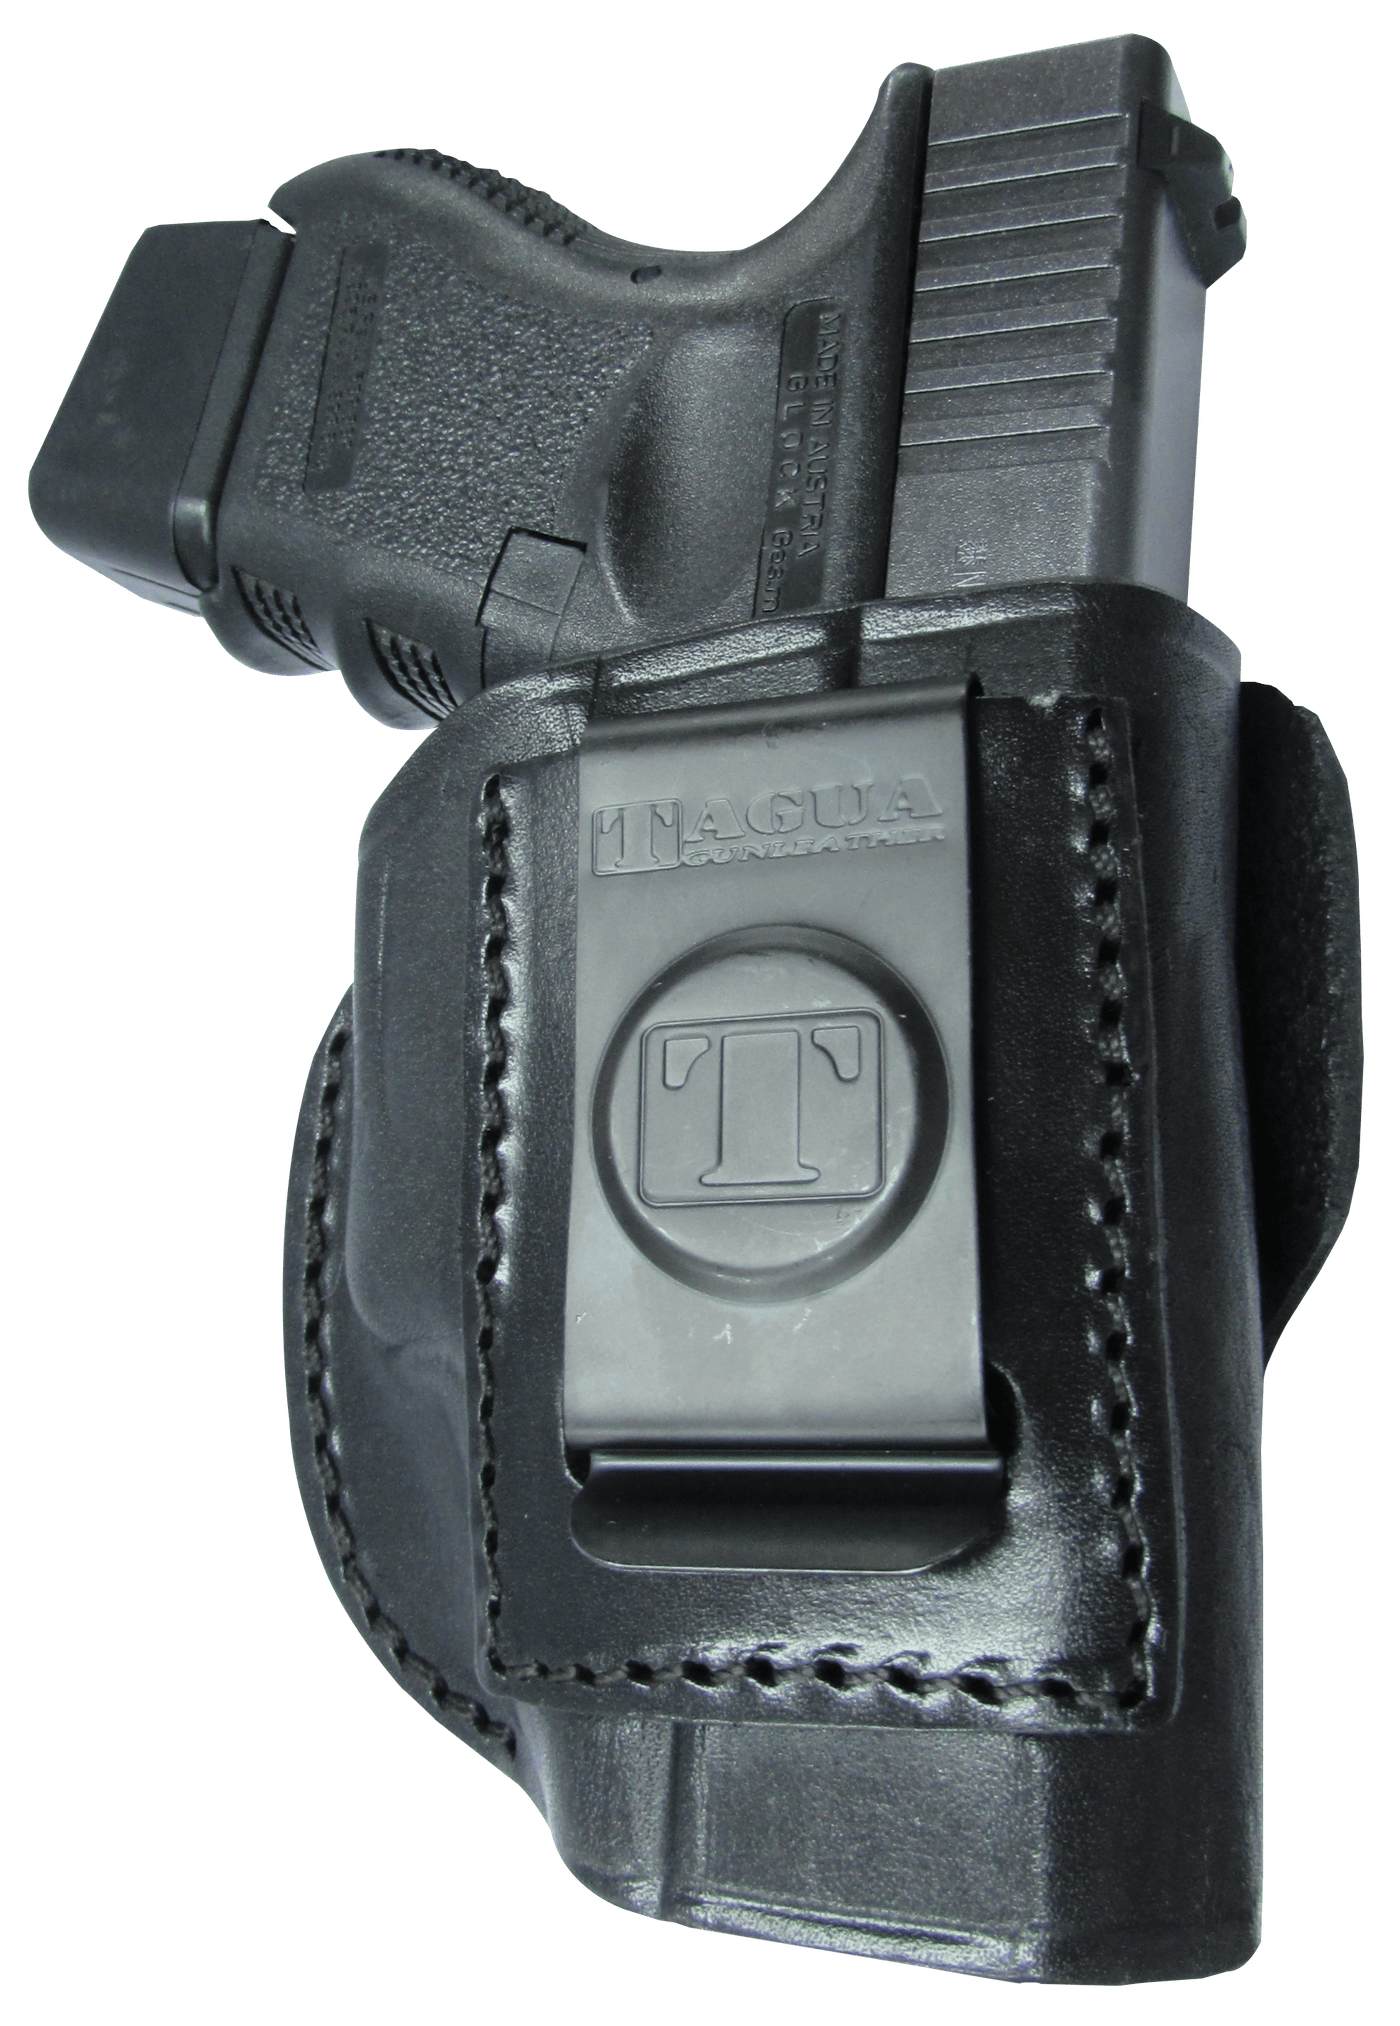 Tagua Tagua 4 In 1 Inside The Pant - Holster Glock 192332 Blk Rh Holsters And Related Items